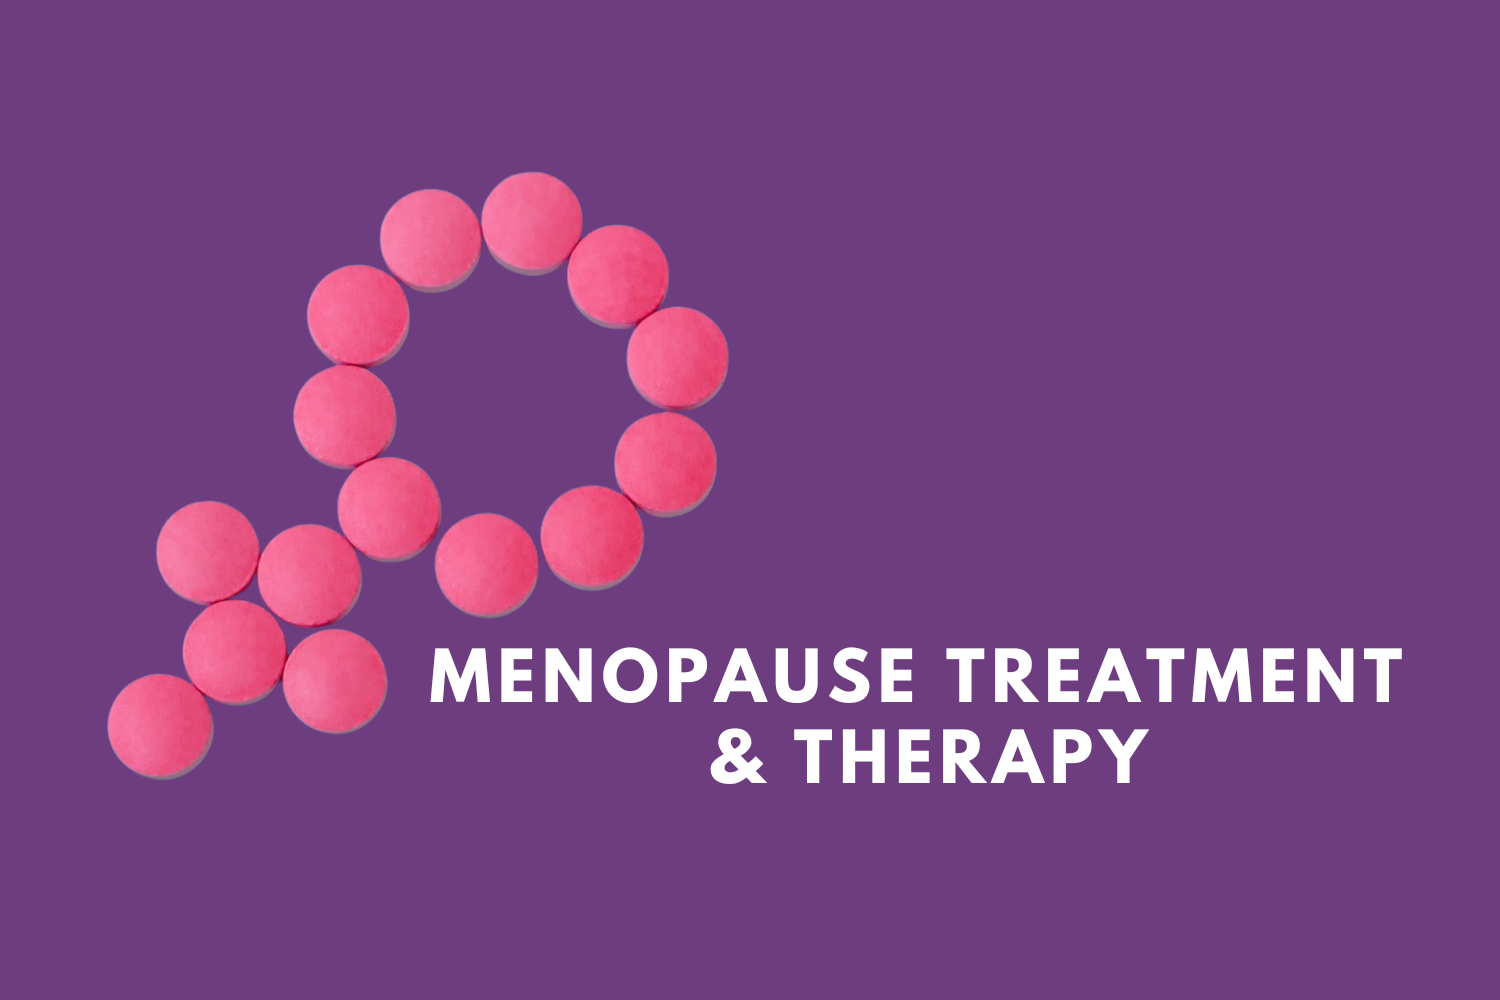 Menopause Treatment & Therapy